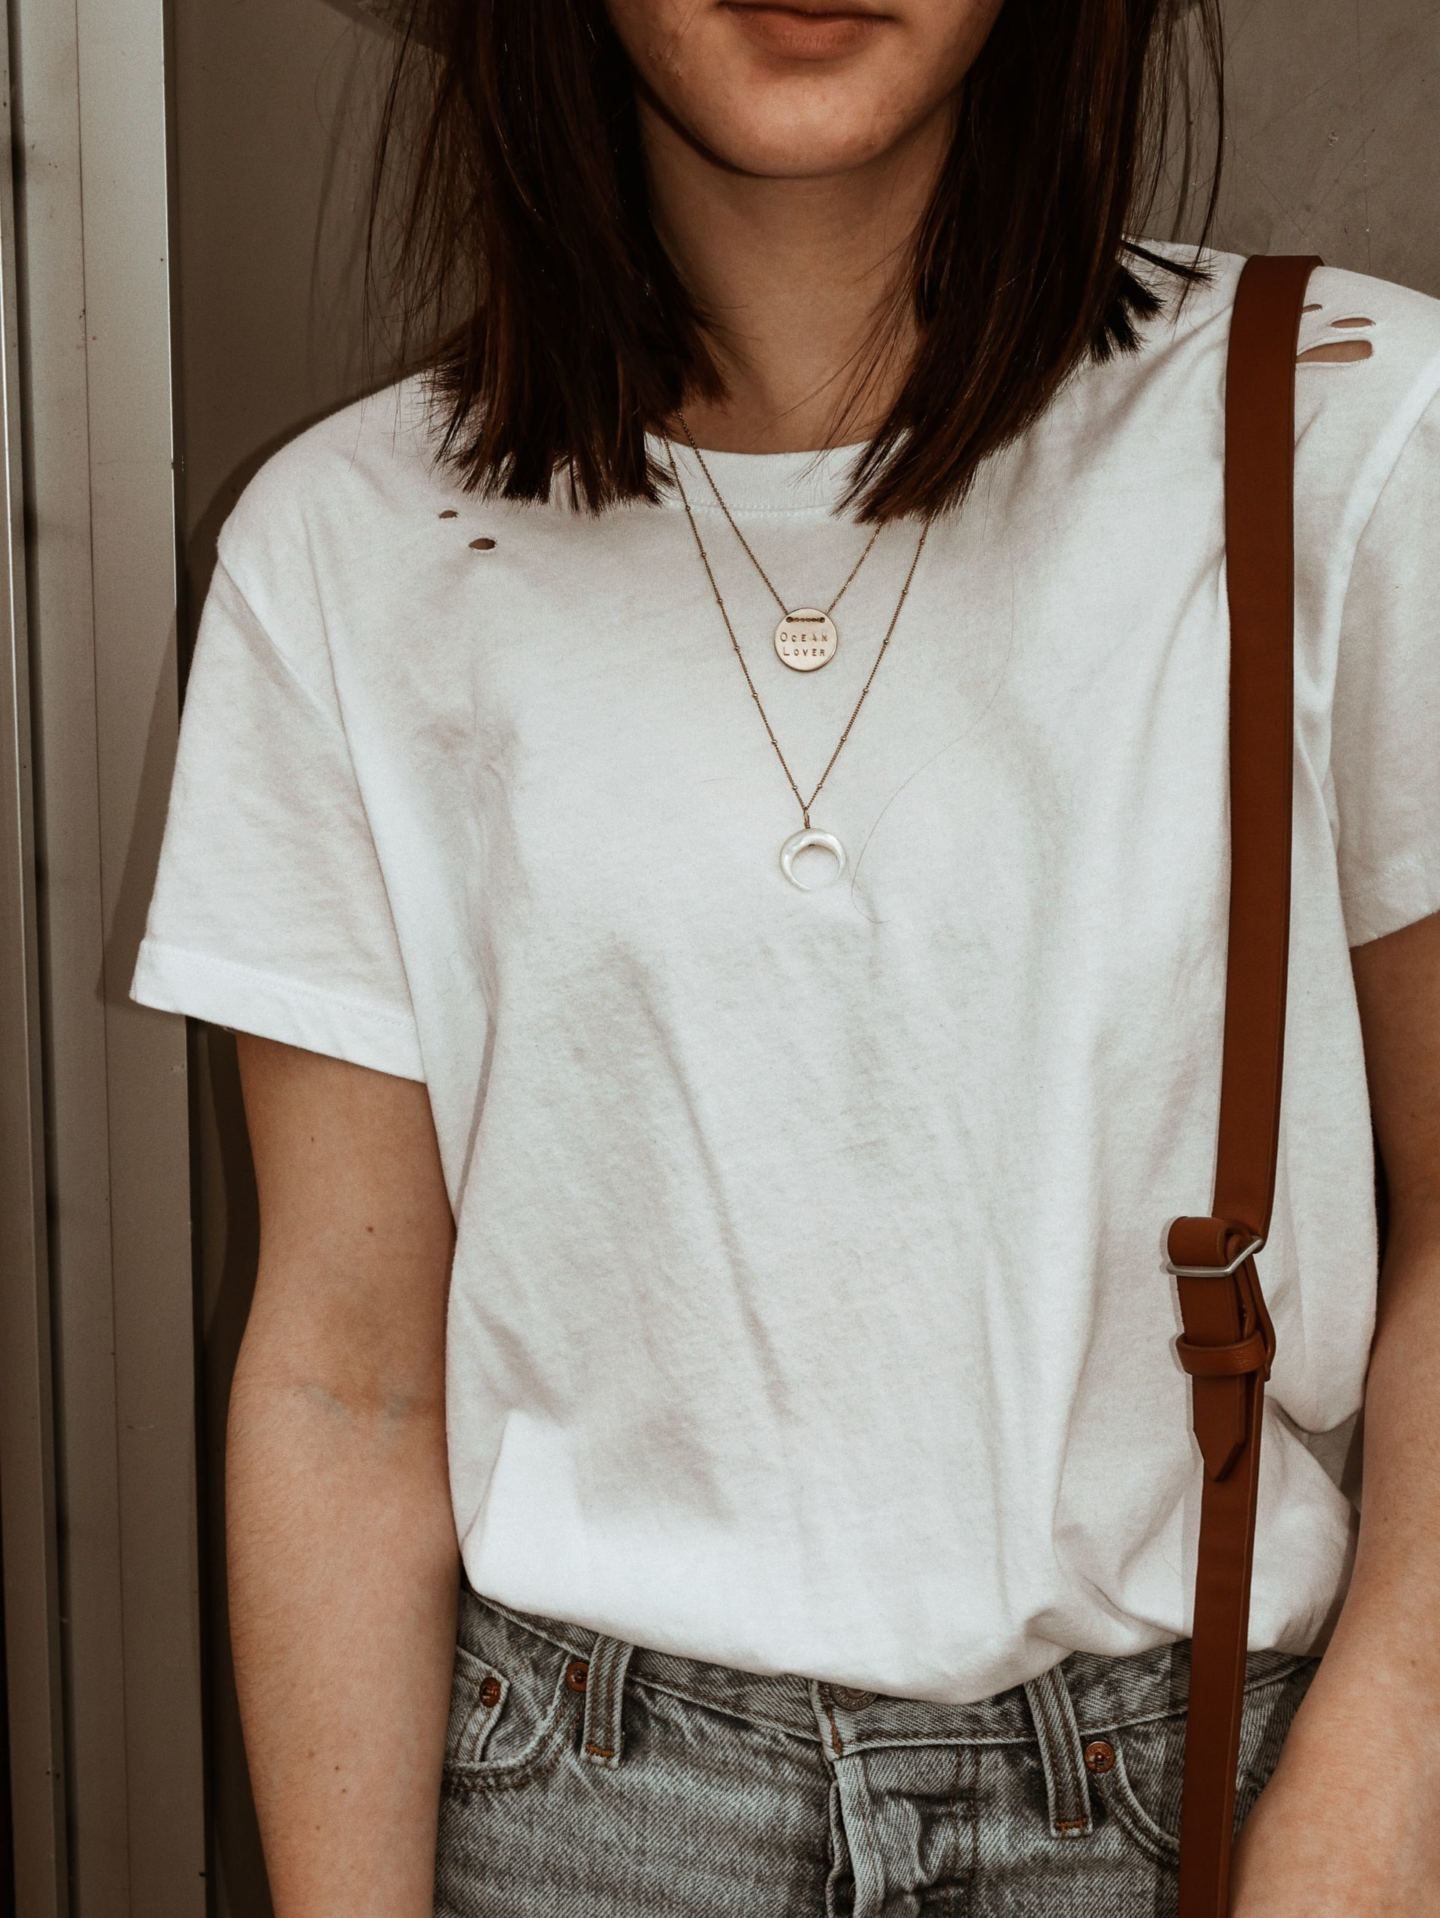 White T-Shirt Outfit Ideas